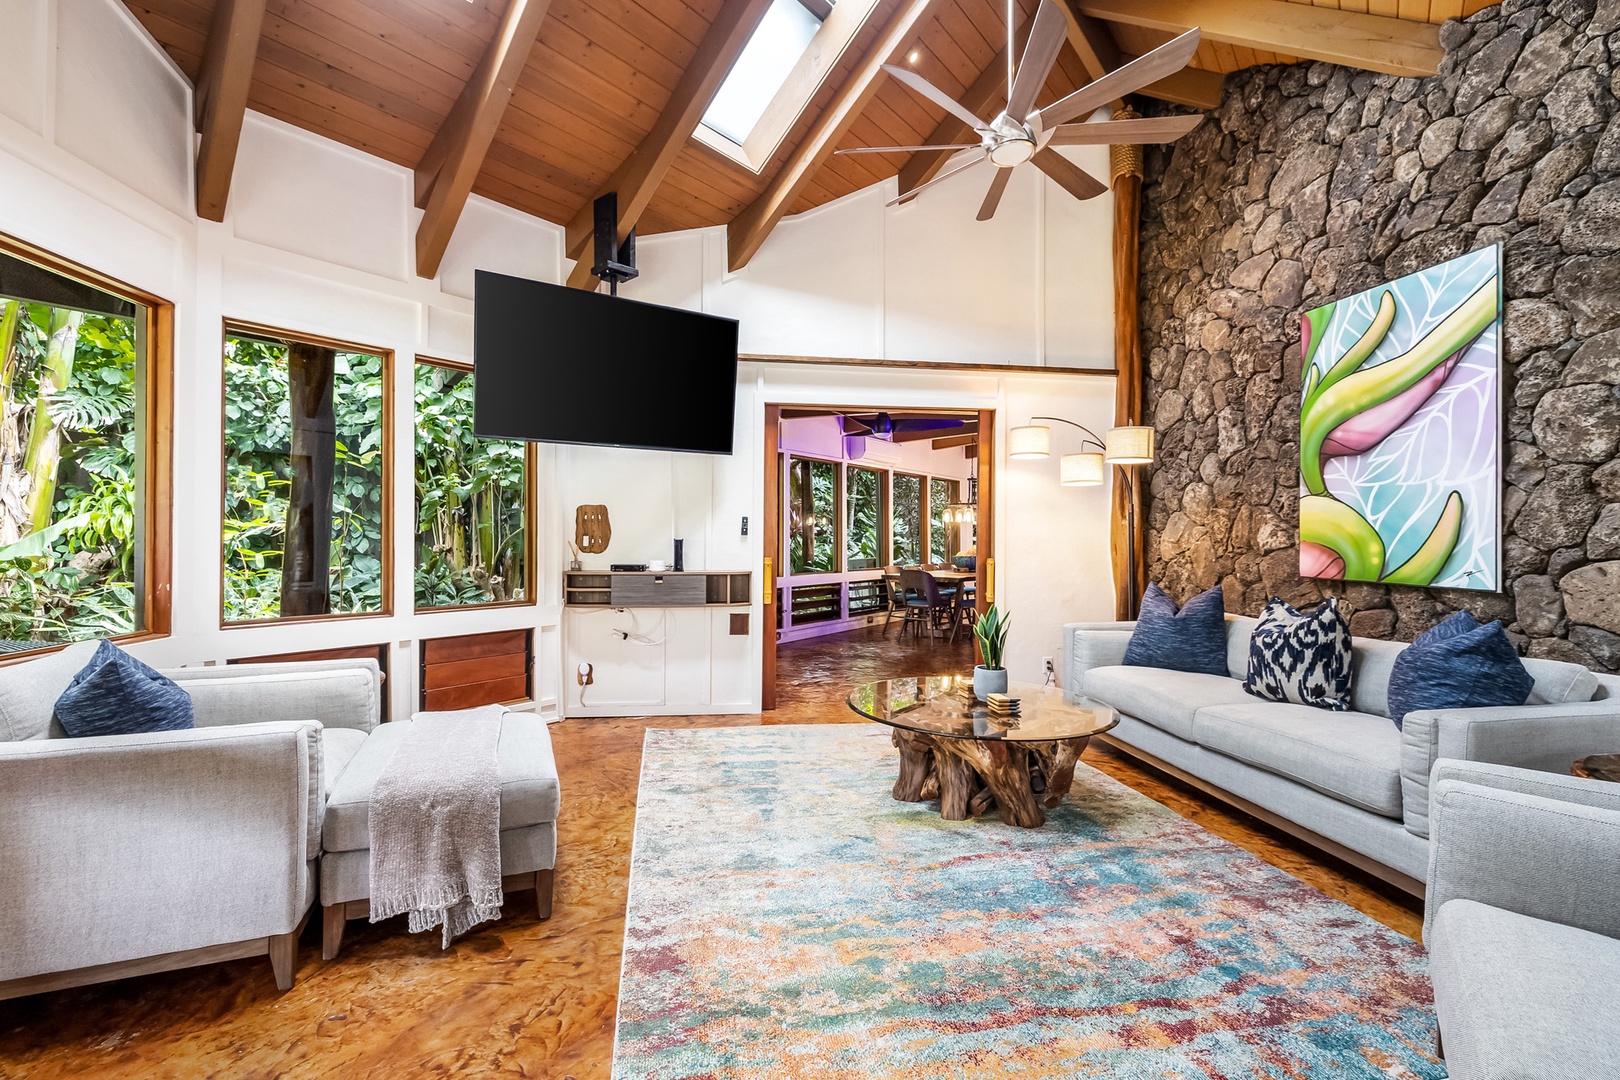 Waimanalo Vacation Rentals, Hawaii Hobbit House - Living area opens to the main dining area